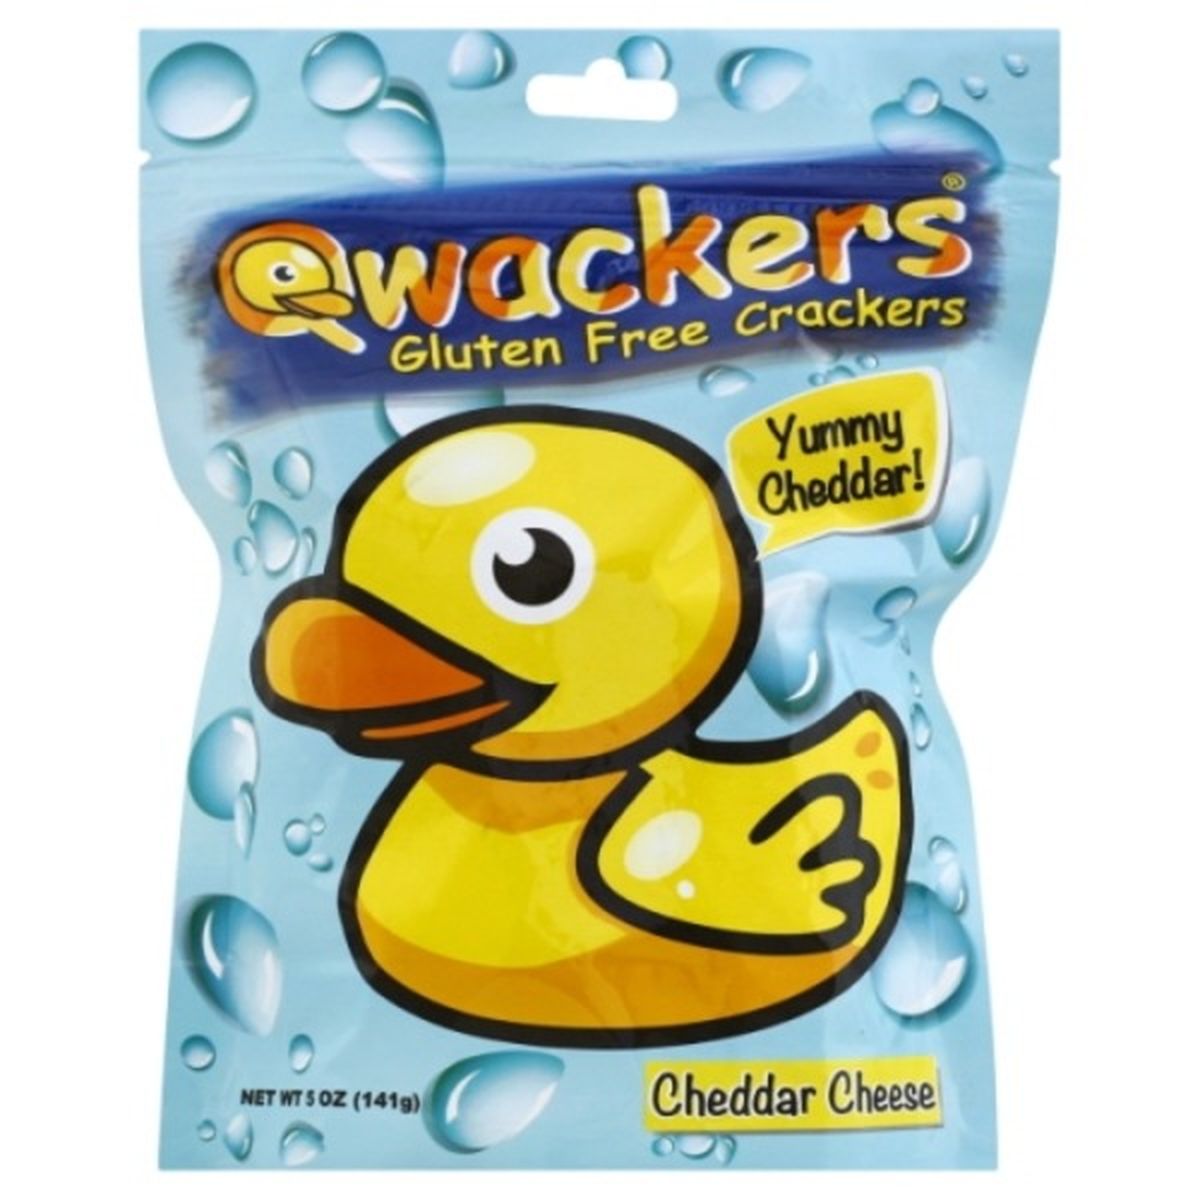 Calories in Qwackers Crackers, Gluten Free, Cheddar Cheese